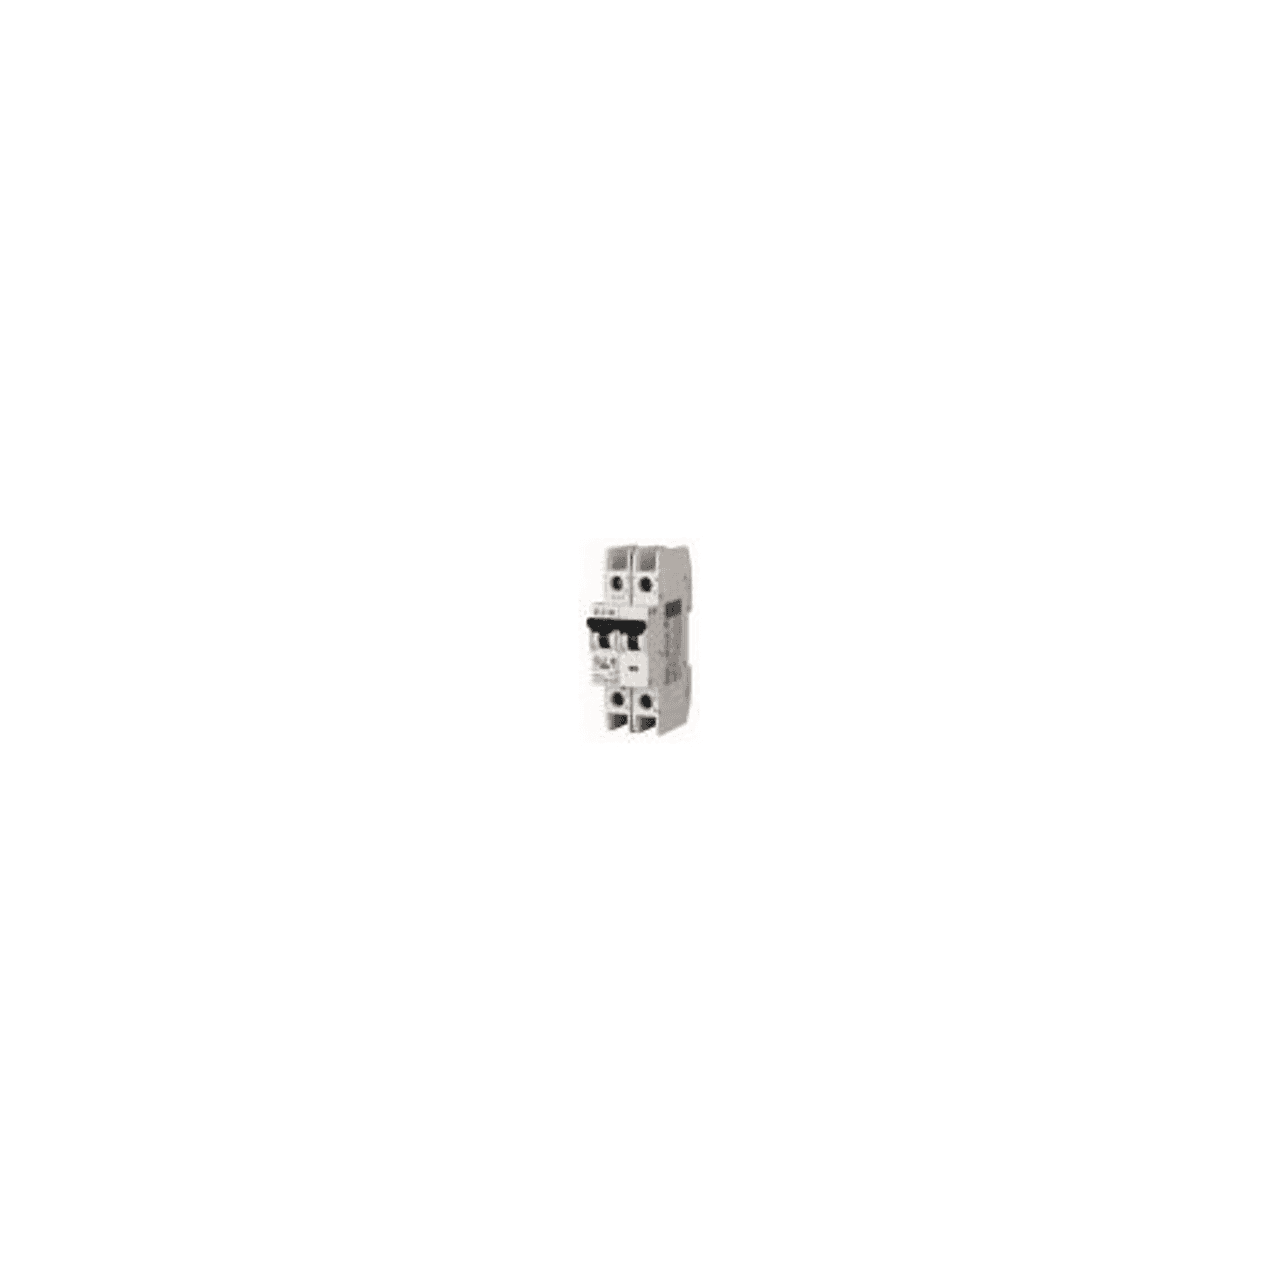 Eaton FAZ-C5/2-NA-DC Eaton FAZ branch protector,UL 489 Industrial miniature circuit breaker - supplementary protector,Medium levels of inrush current are expected,5 A,10 kAIC,Two-pole,125 Vdc per pole,5-10X /n,50-60 Hz,Screw terminals,C Curve